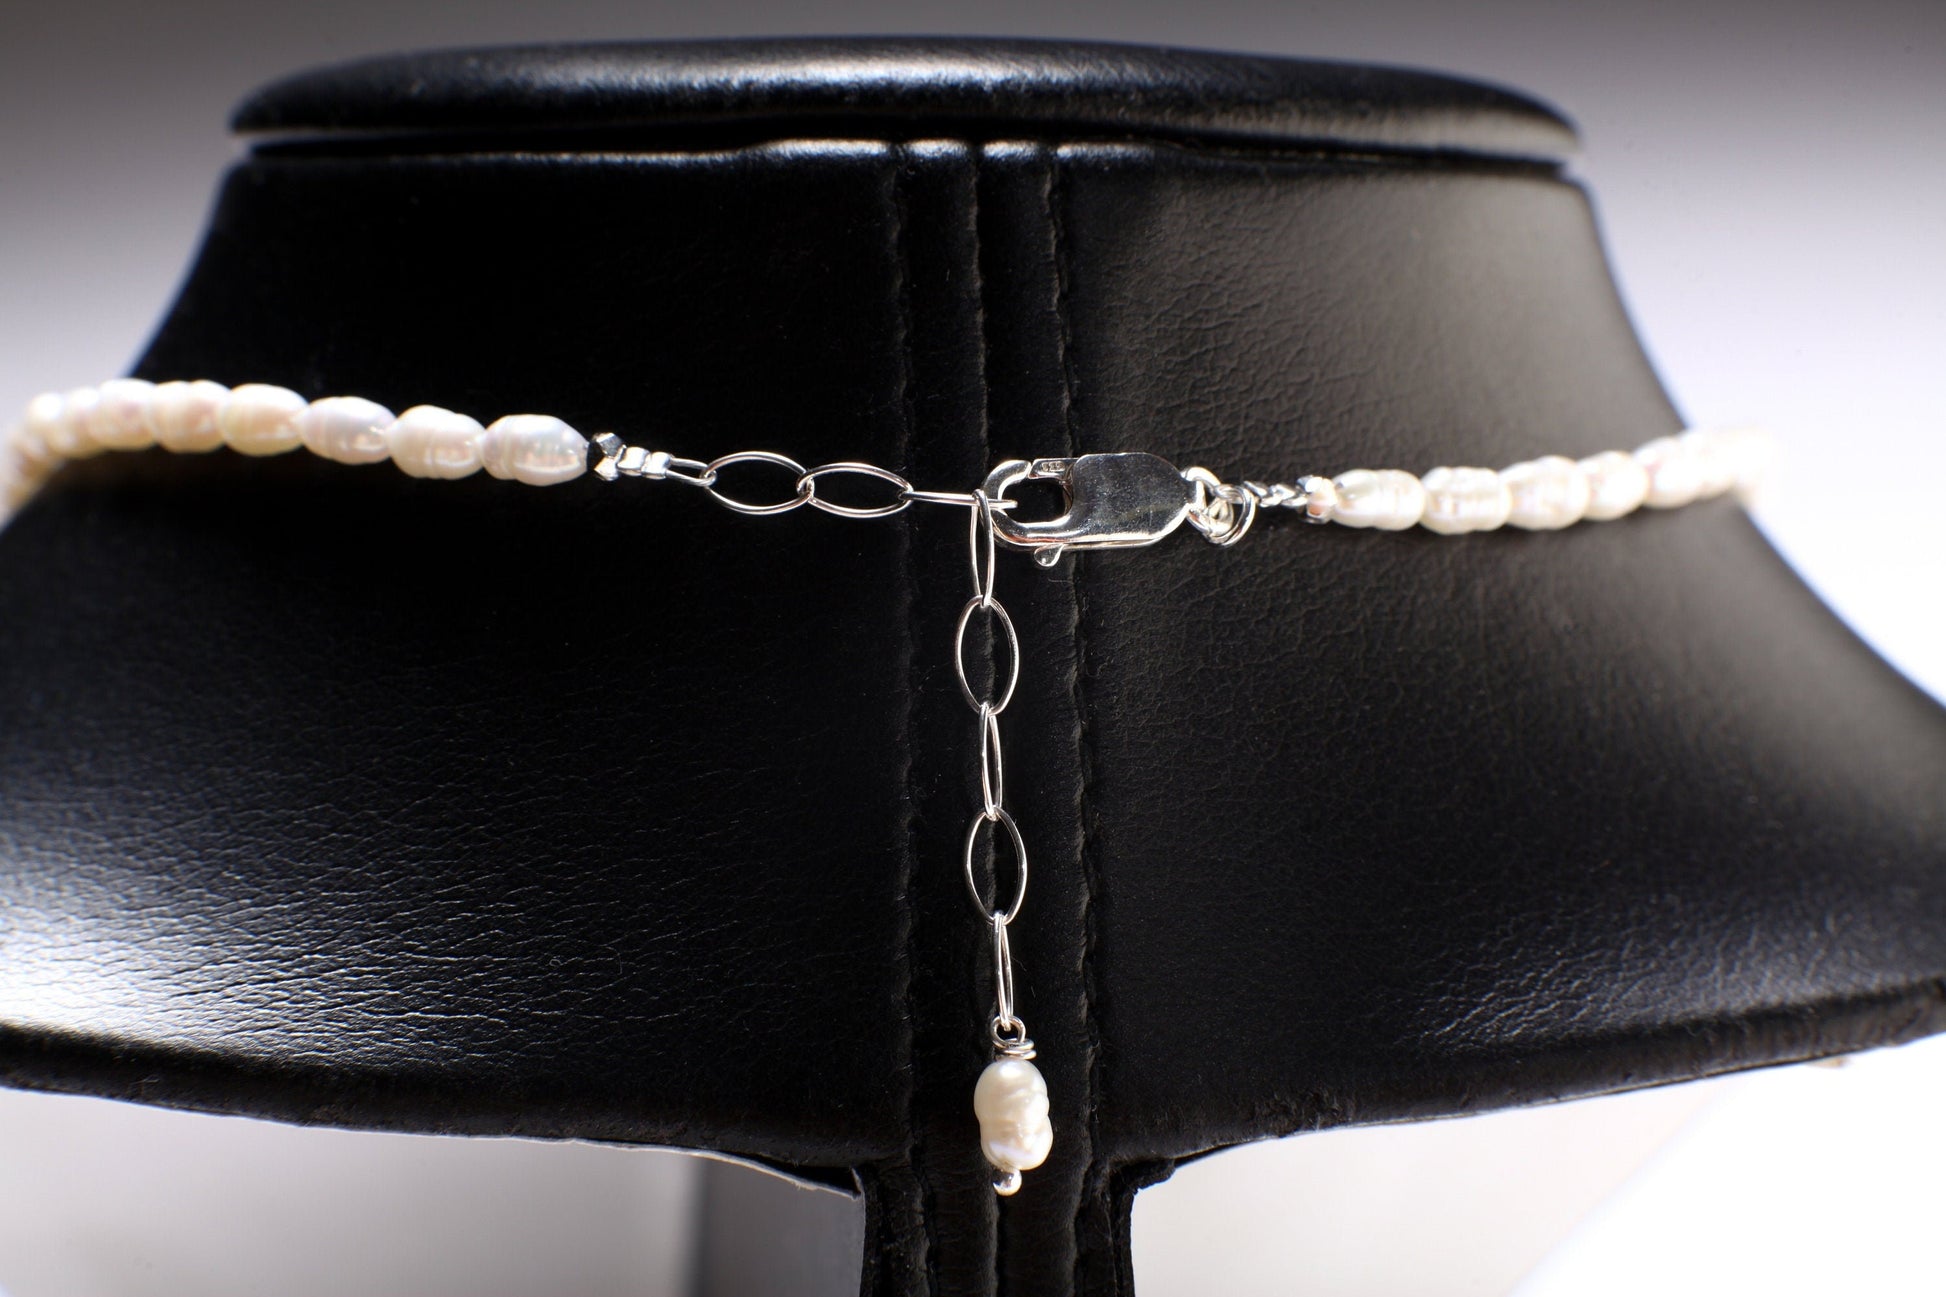 Natural Japanese Fresh Water Biwa Stick Pearl and Potato Pearl Necklace in 925 Sterling Silver Lobster Clasp,pic shown 19&quot; with 2&quot; Extension